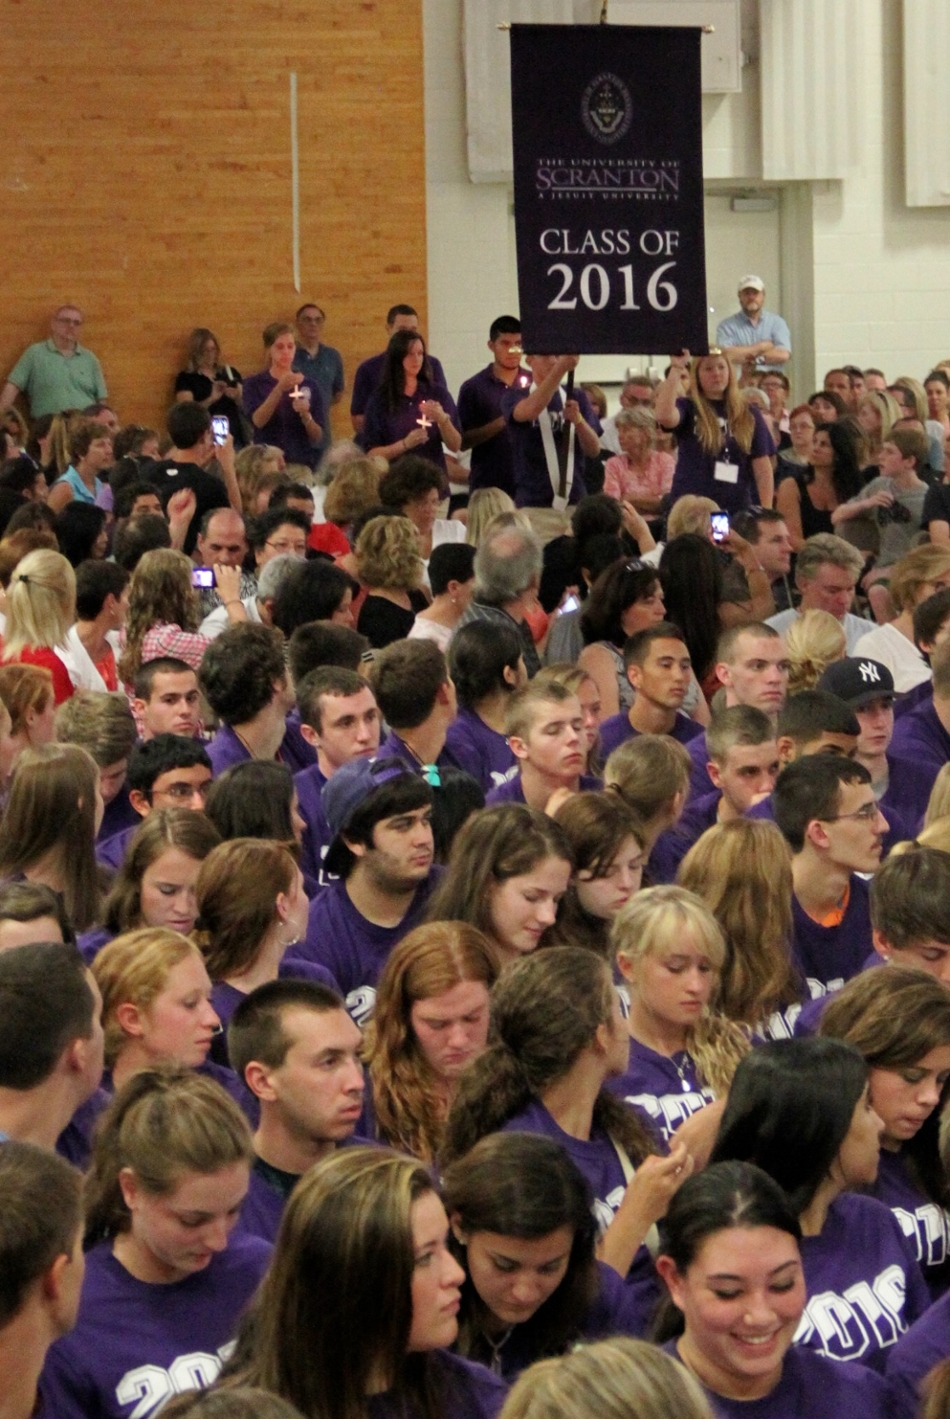 The University of Scranton class of 2016 banner is introduced at freshman convocation in August of 2012. Commencement ceremonies for the class of 2016 will be held this weekend.